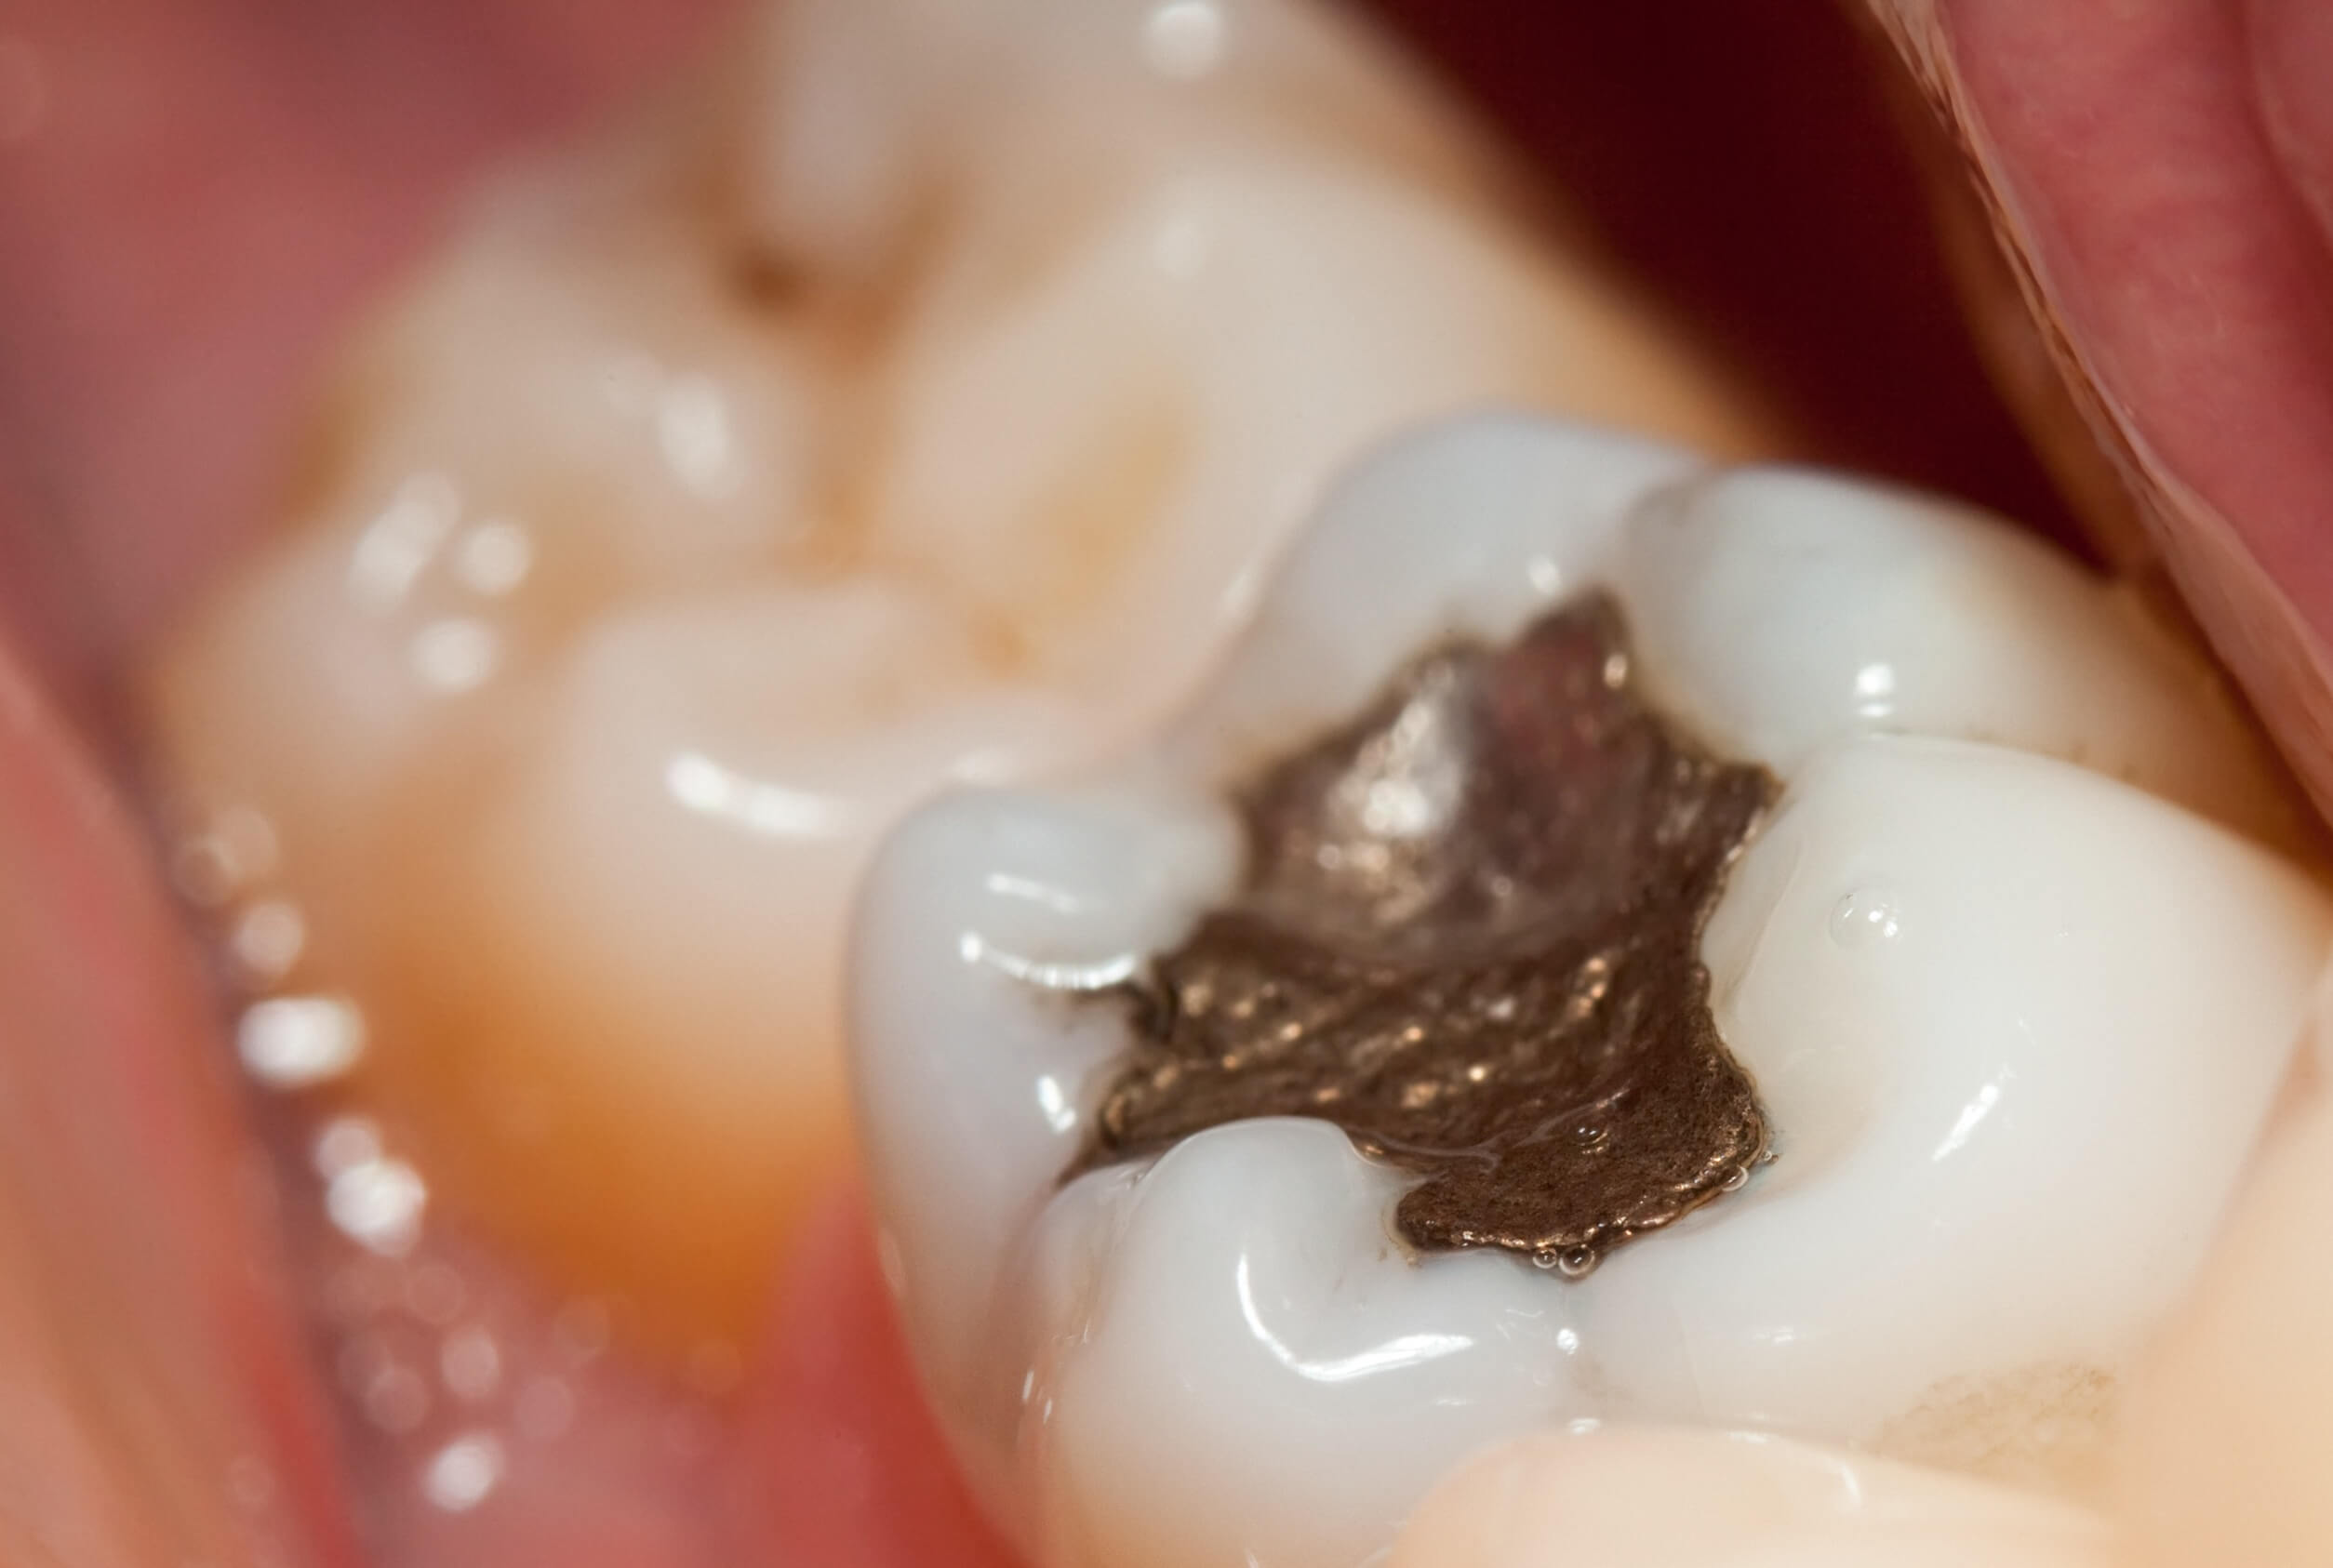 14 Facts About Mercury Toxicity From Amalgam Dental Fillings